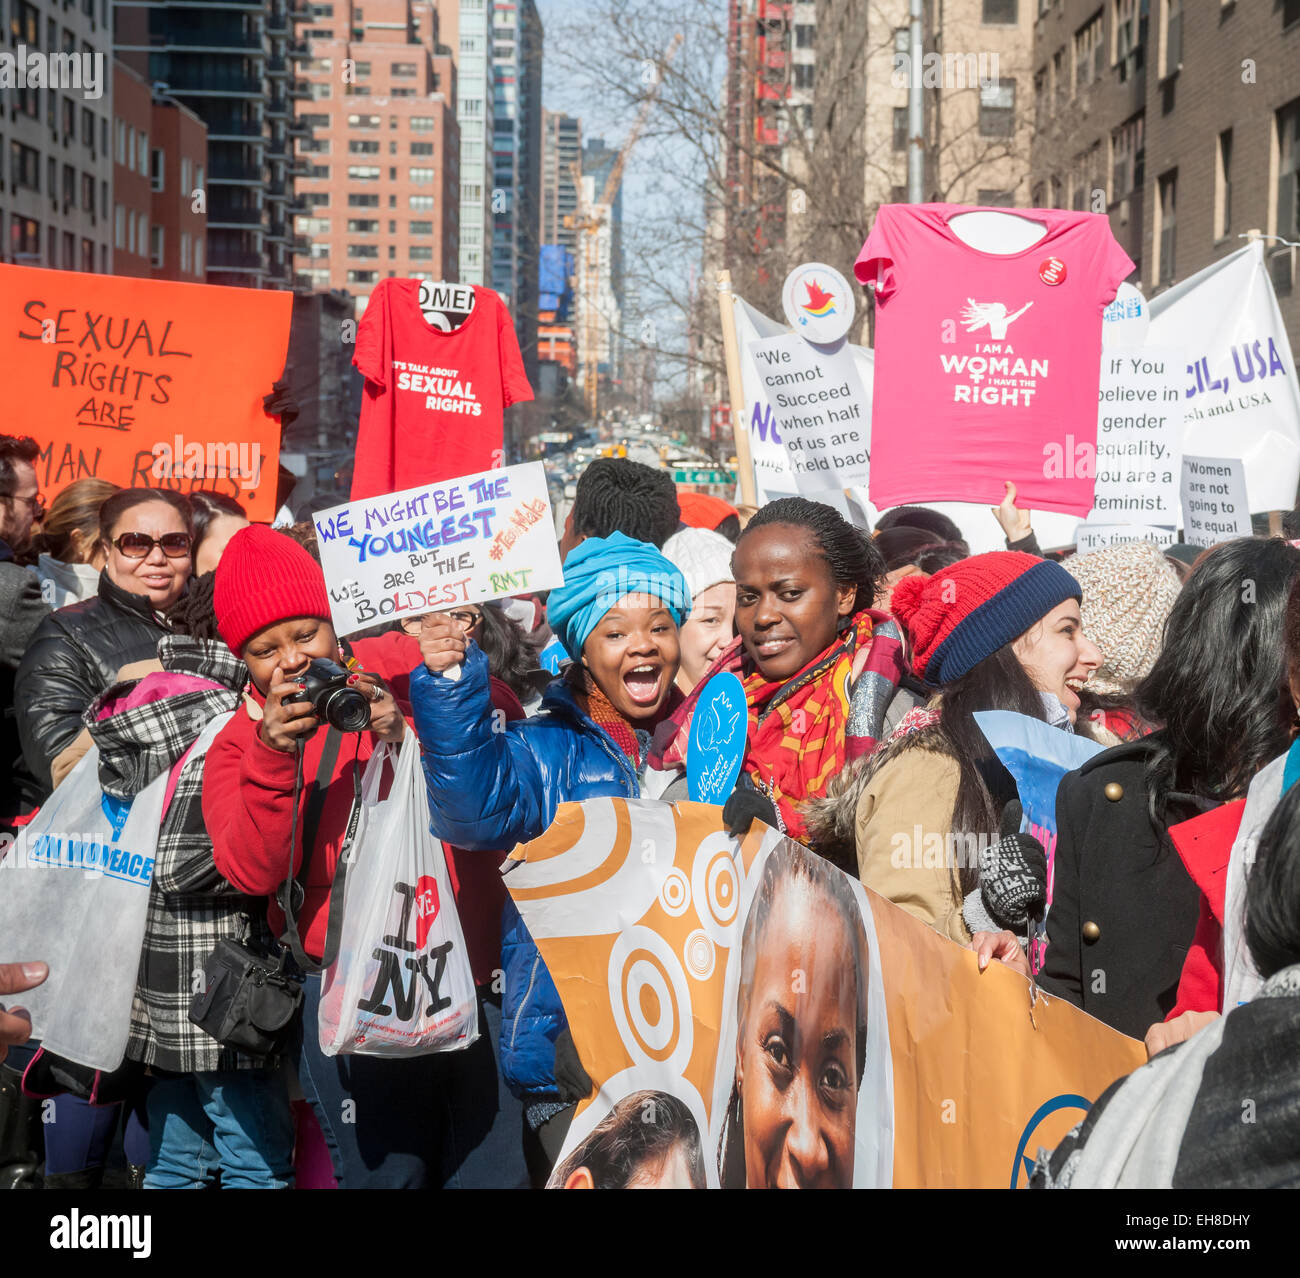 New York, USA. 08th Mar, 2015. Thousands participate in the March for Gender Equality and Women's Rights on International Women's Day in New York on Sunday, March 8, 2015. The march, co-hosted by the U.N. and NYC with NGO organizations, traveled from the United Nations to Times Square and called for gender equality across multiple platforms including pay, the glass ceiling and political representation. Credit:  Richard Levine/Alamy Live News Stock Photo